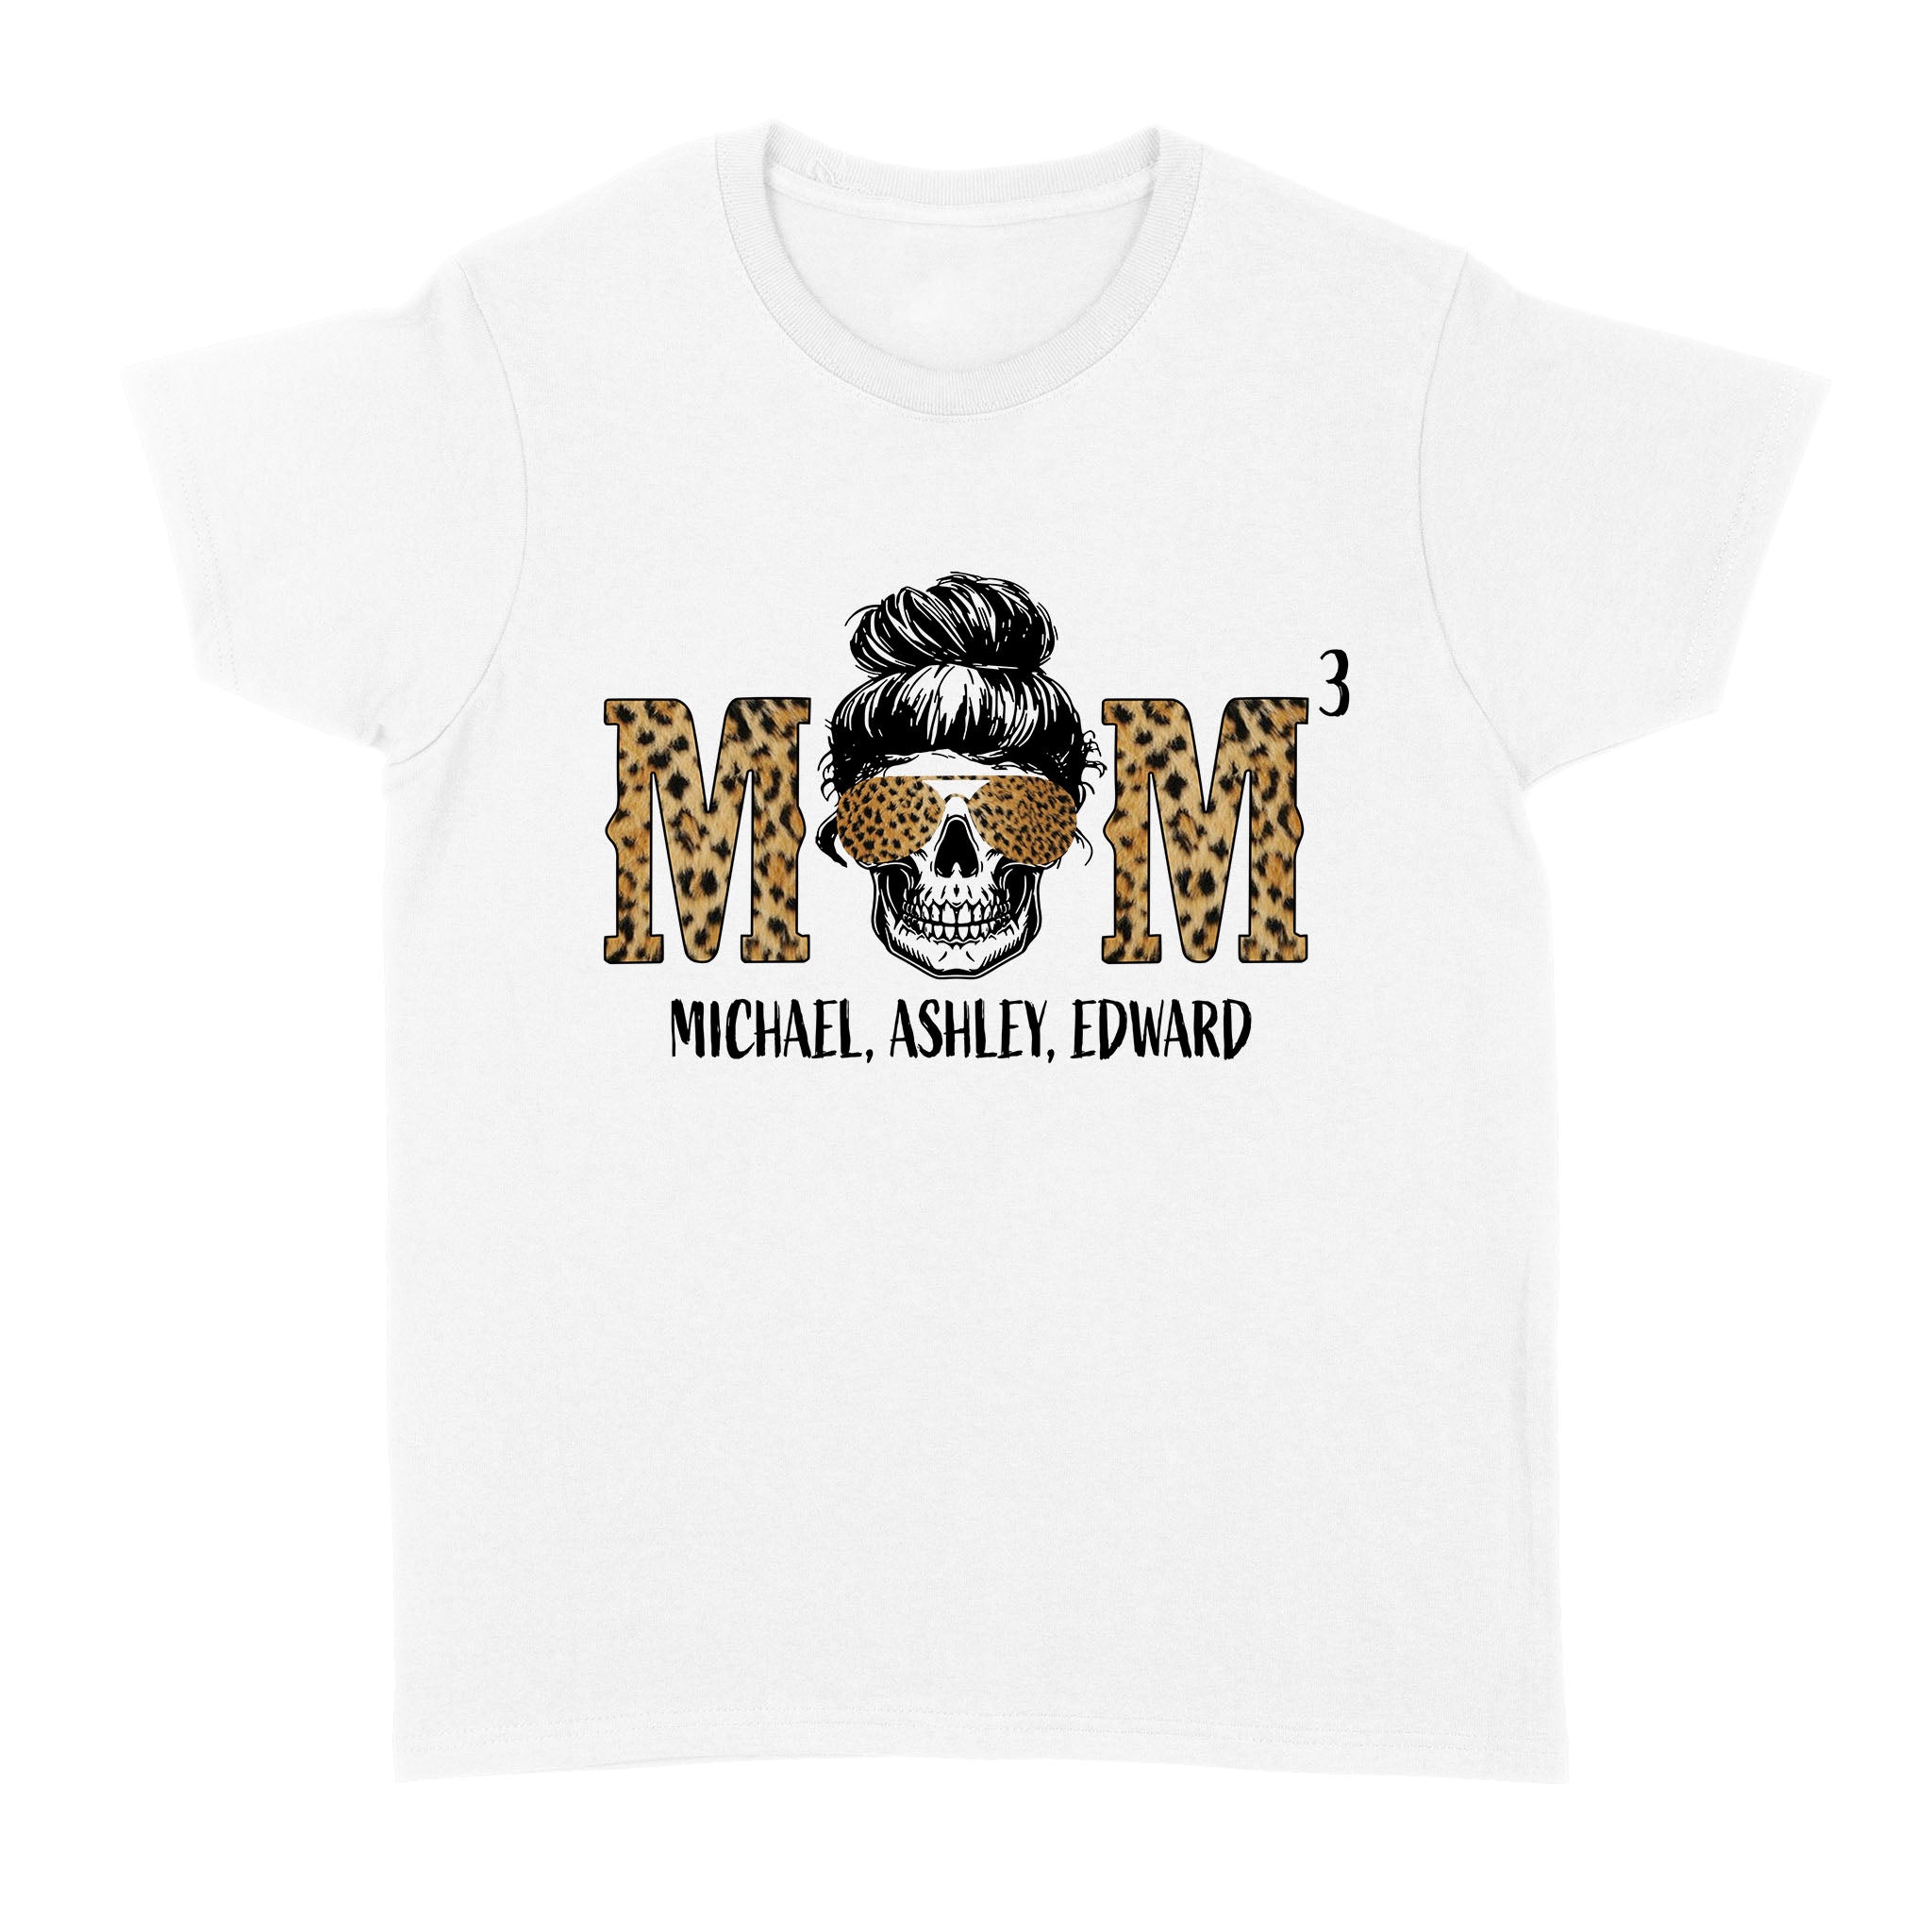 Custom Mother's day shirt ideas, mom life shirt, personalized gift ideas for mom NQS1630 - Standard Women's T-shirt